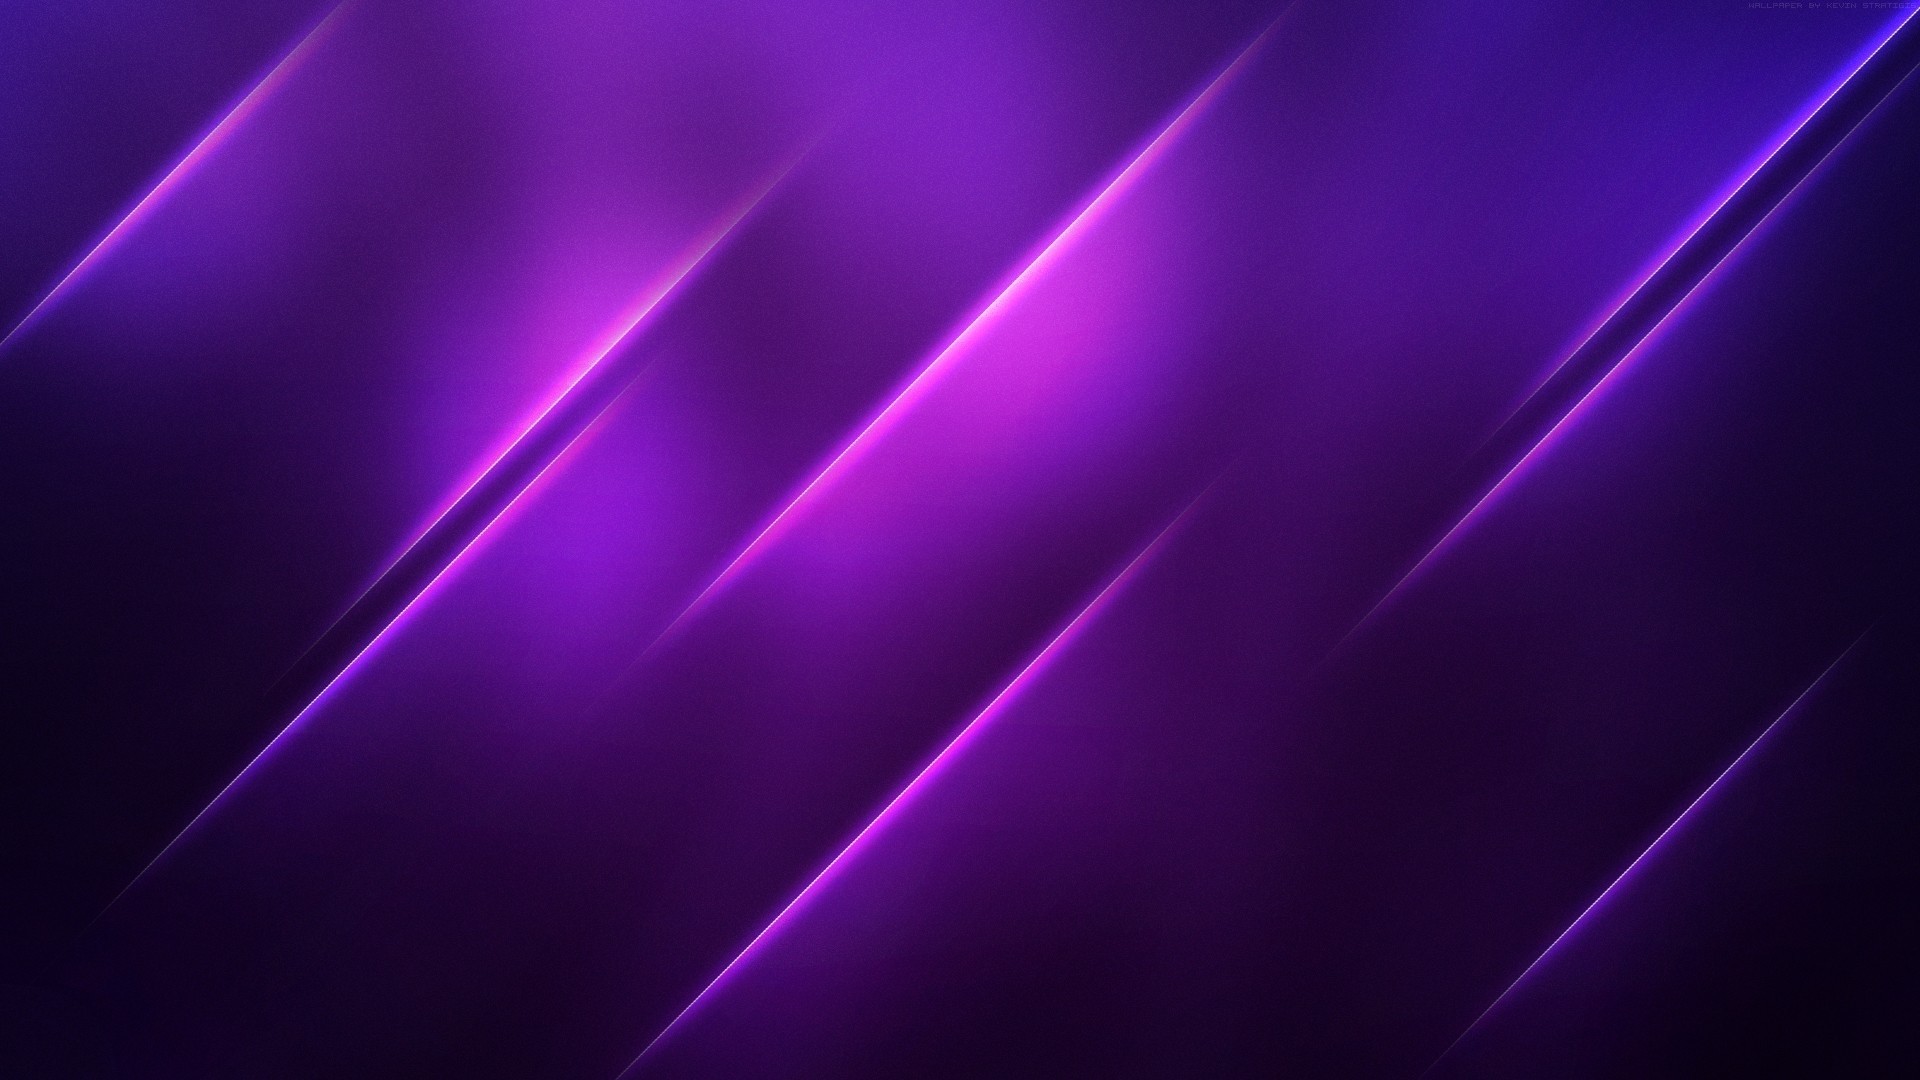 1920x1080 Solid Purple Backgrounds, wallpaper, Solid Purple Backgrounds hd .